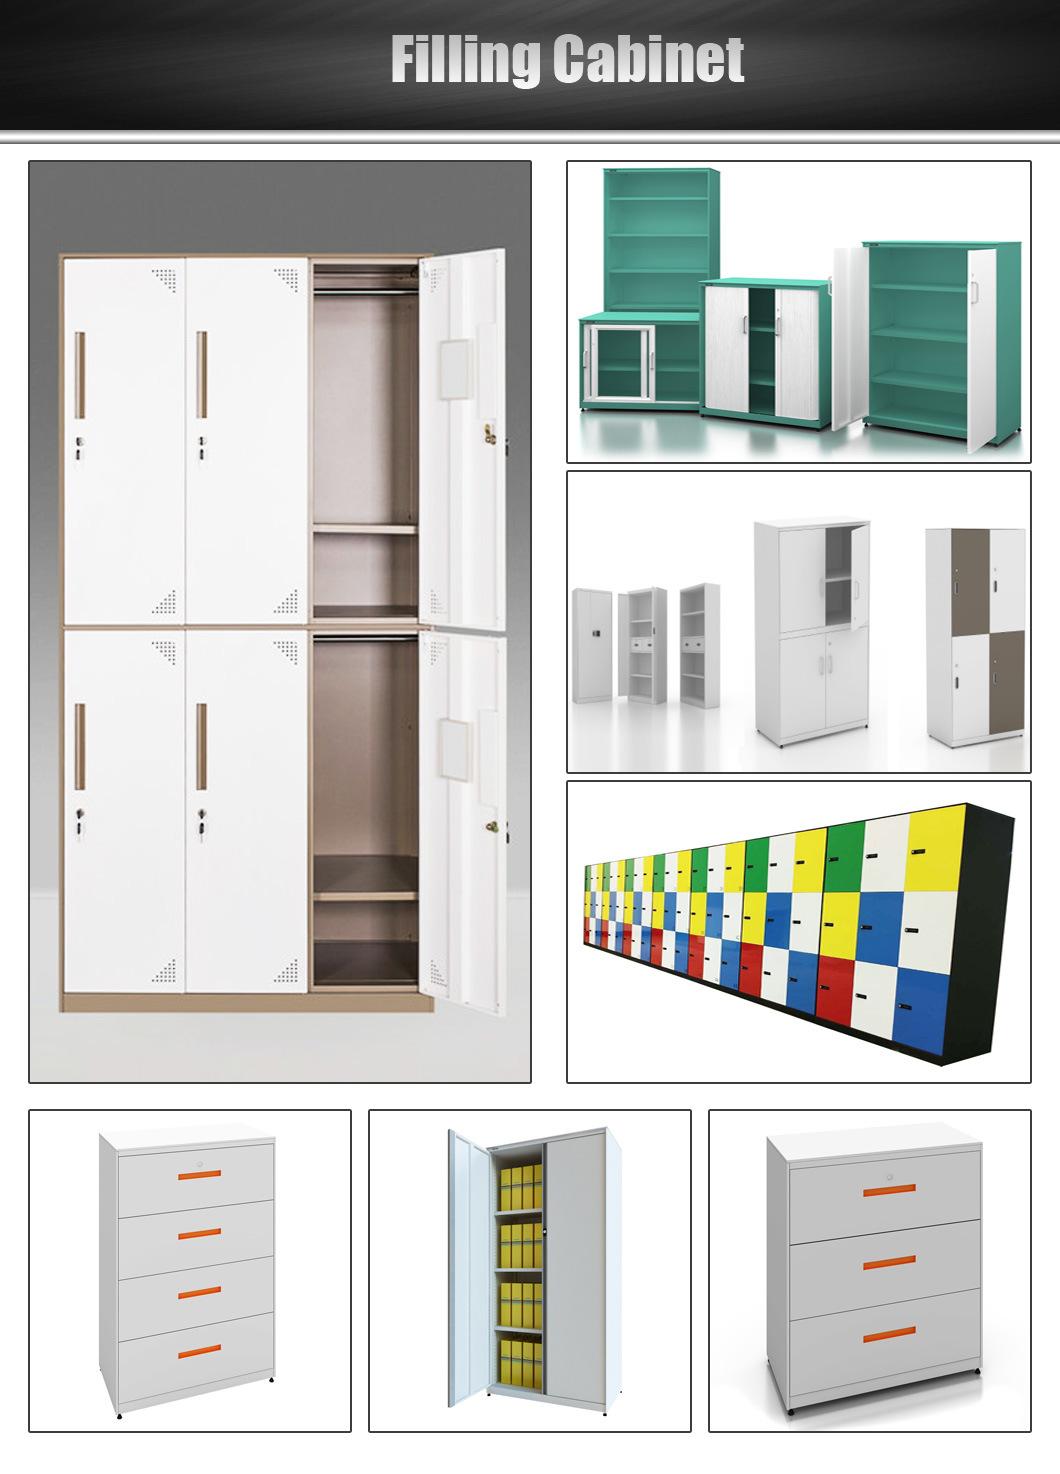 Reliable and Cheap Steel Locker/Storage Cabinet with Many Certification